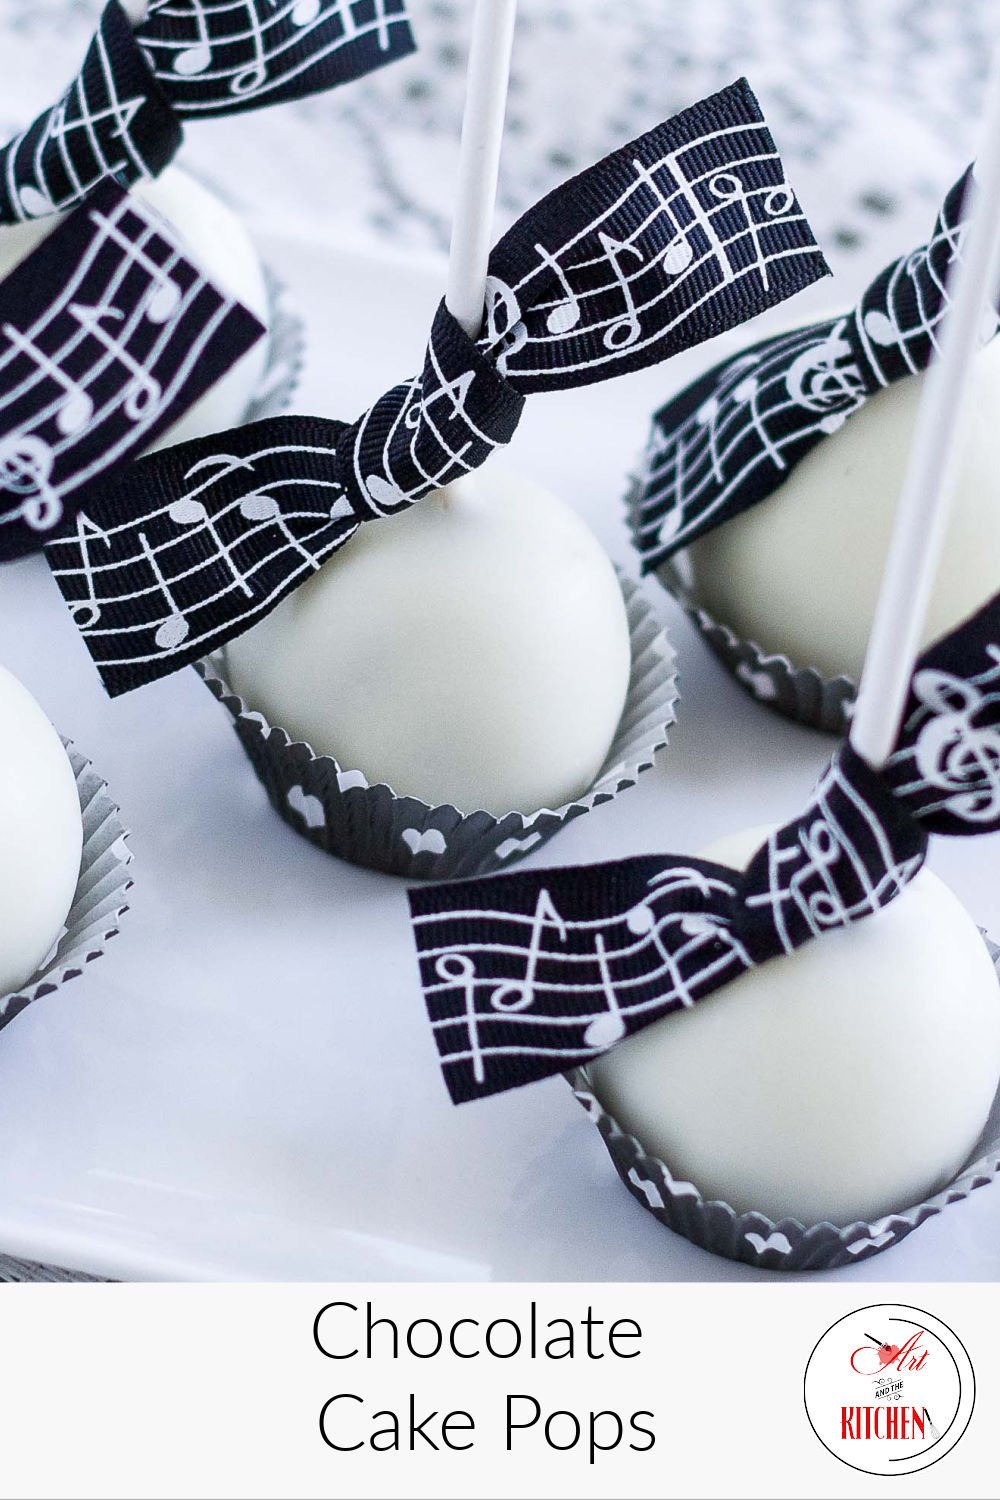 White chocolate coated cake pops with music themed ribbon tied to stick.